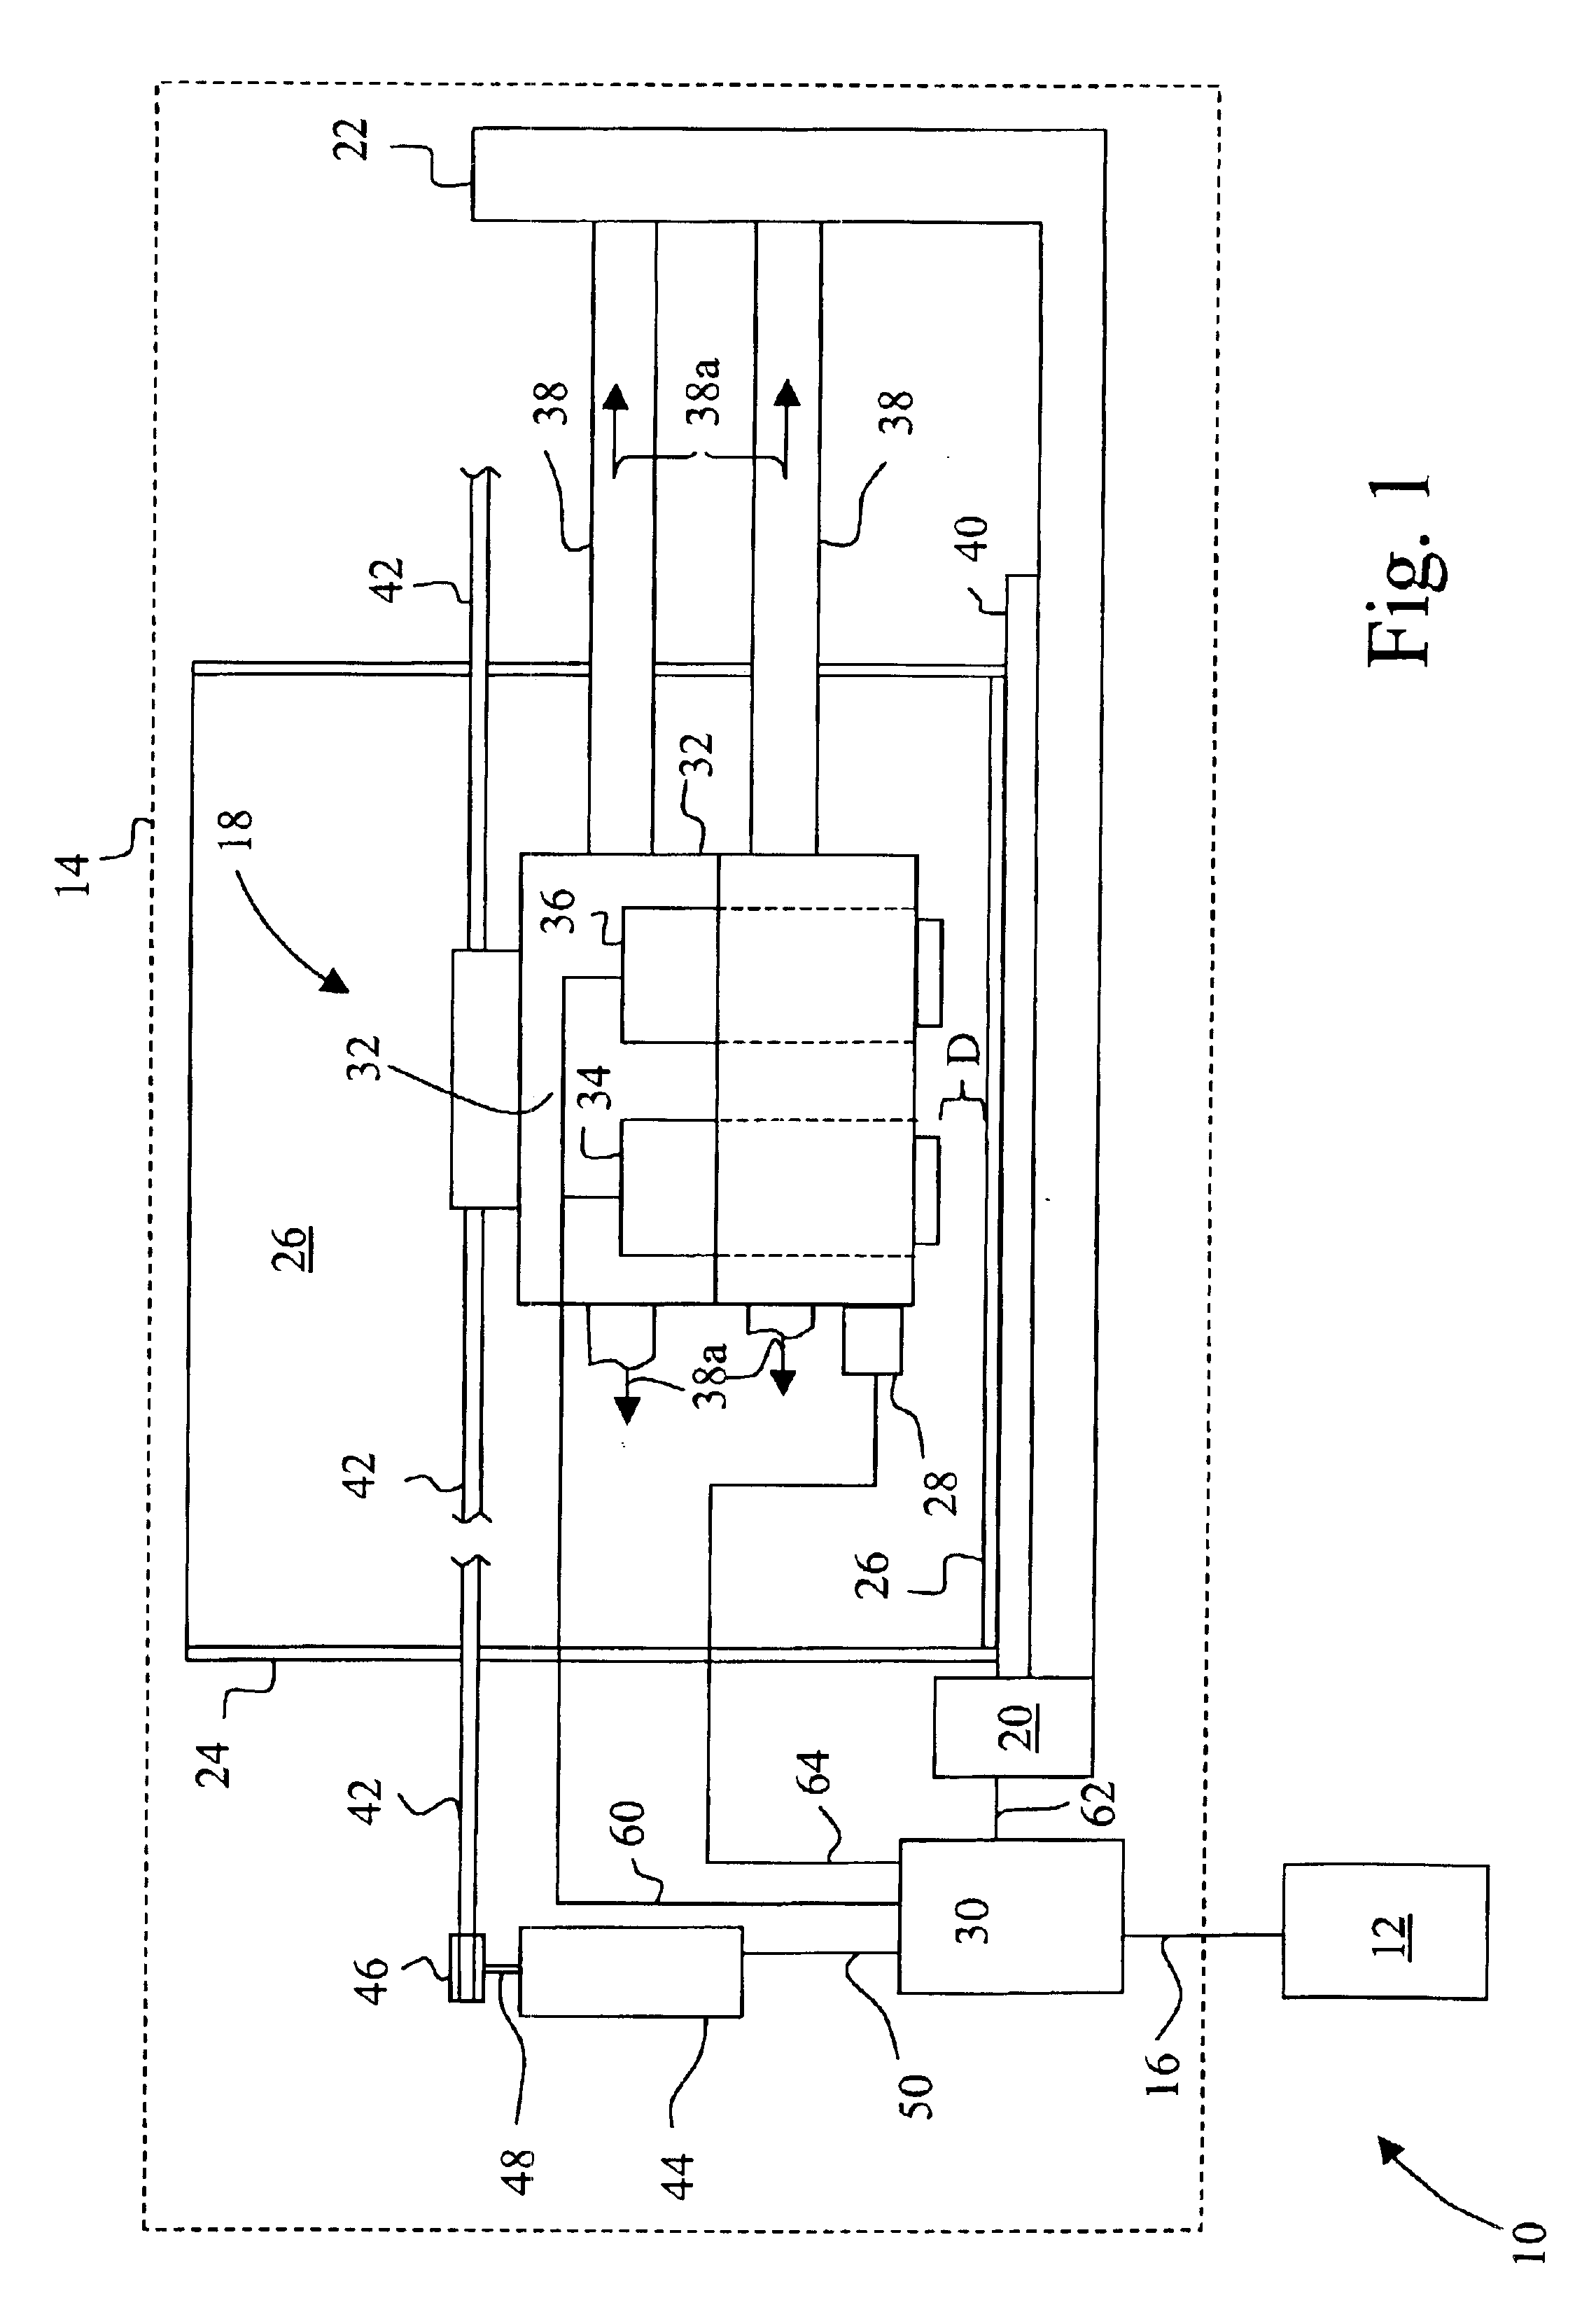 Method and apparatus for adjusting drop velocity